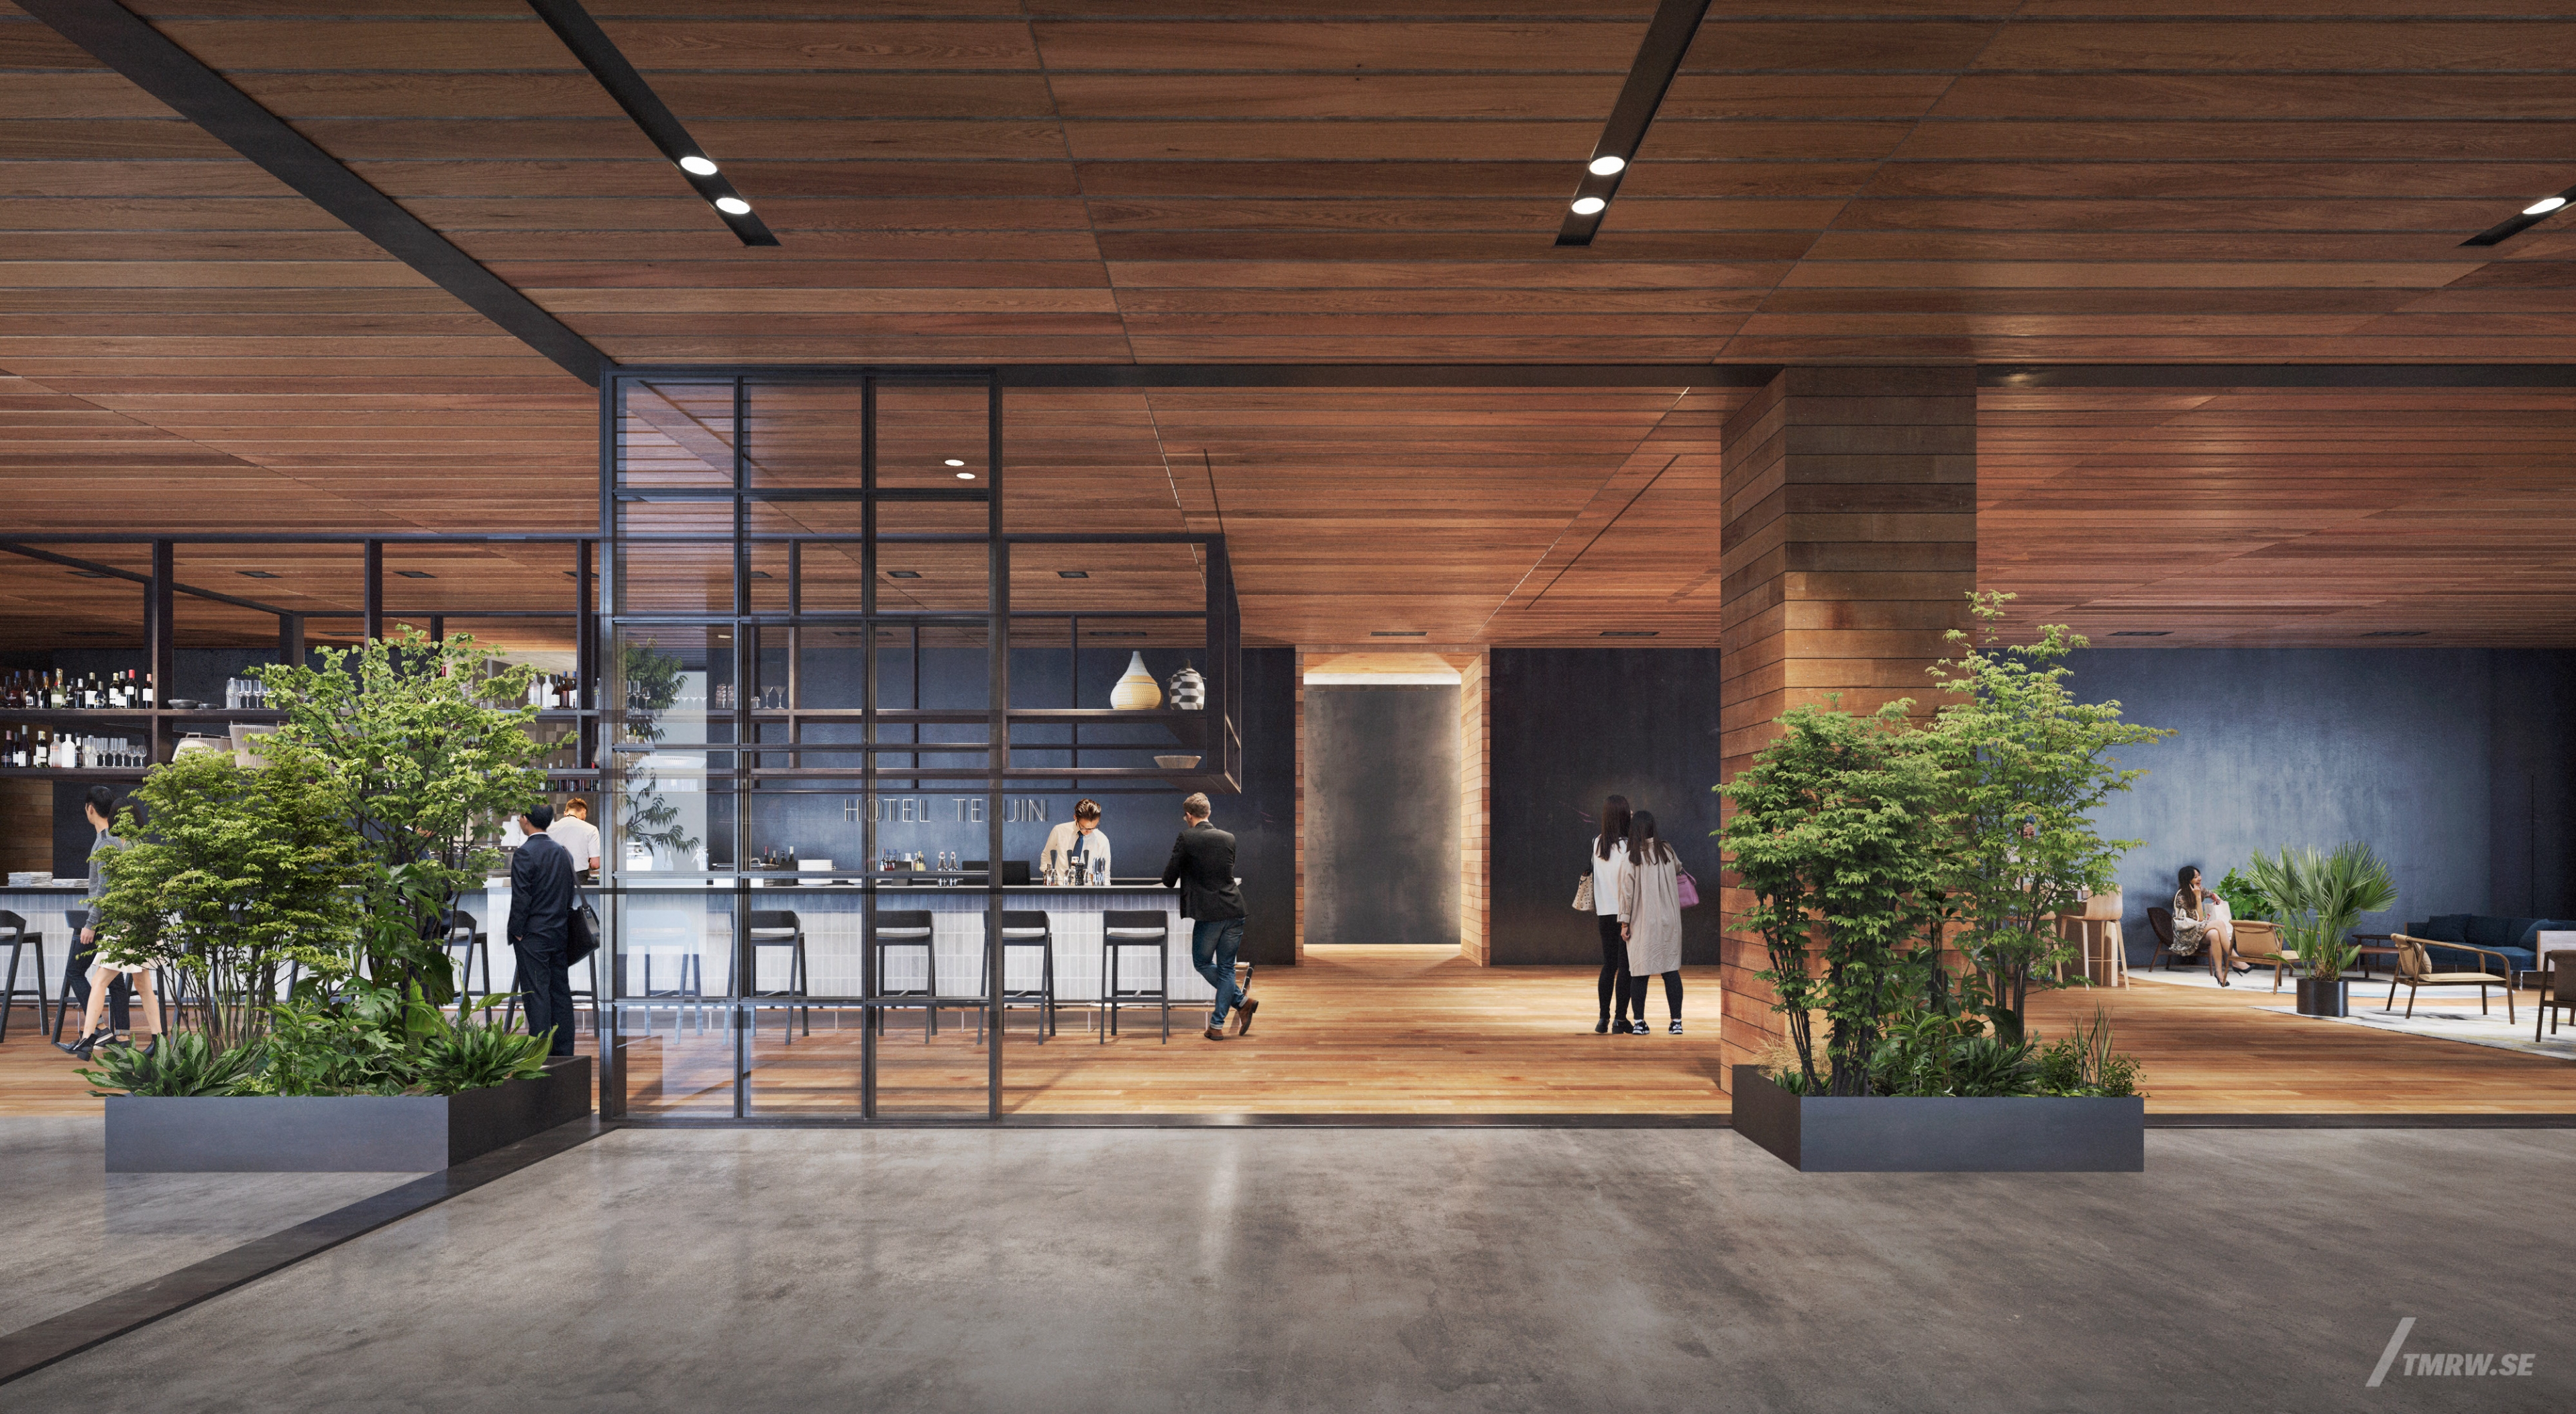 Architectural visualization of Shin Fukuoka for KPF. A image of the interior of an office with people hanging out in the lobby in daylight.